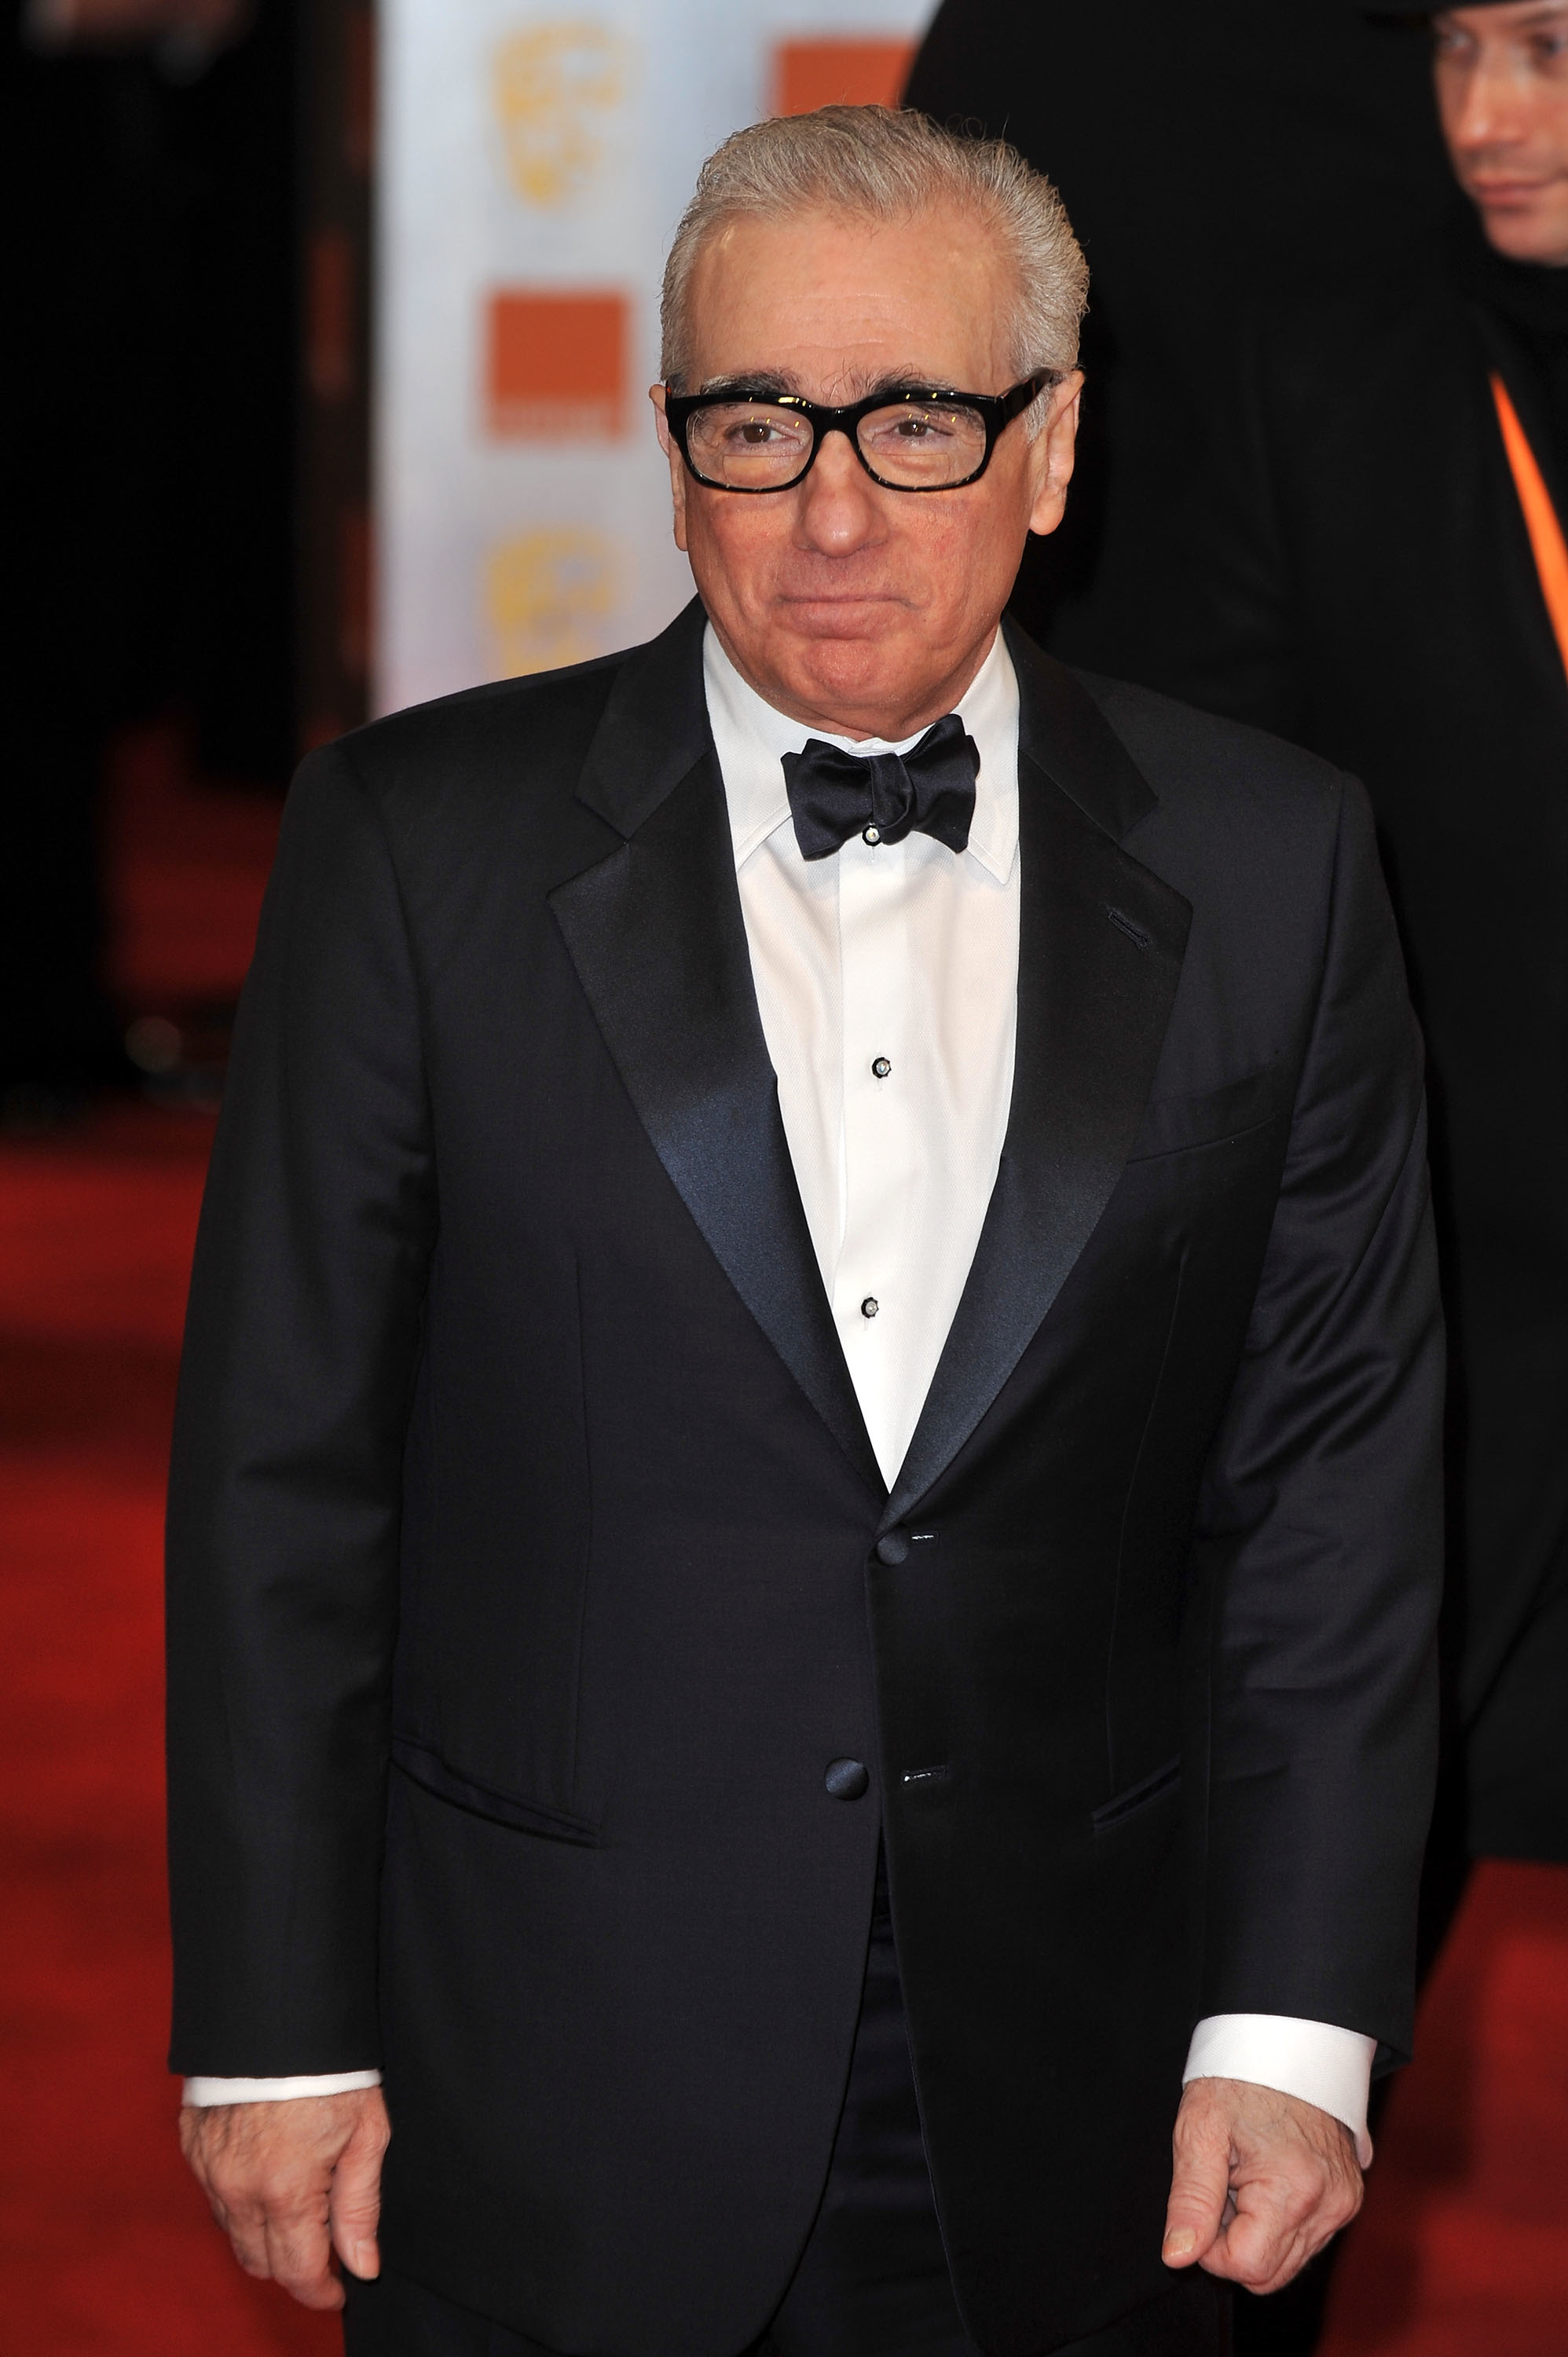 Martin Scorsese in a black suit and bow tie on the red carpet